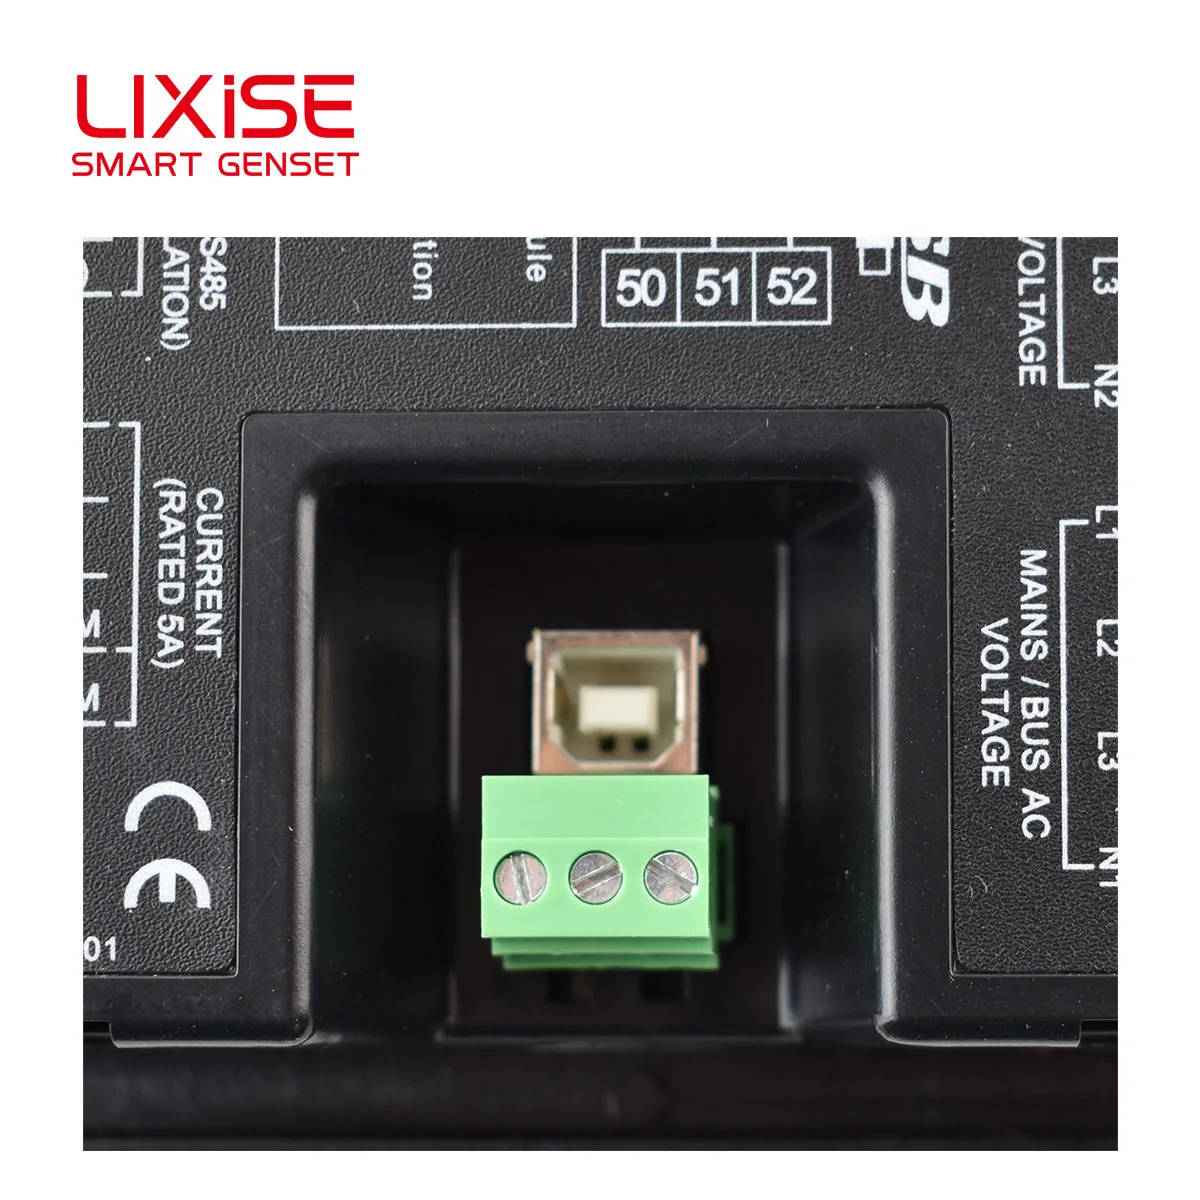 LIXiSE LXC7220 AMF genset controller completely replace DSE7120 7220 diesel generator control unit